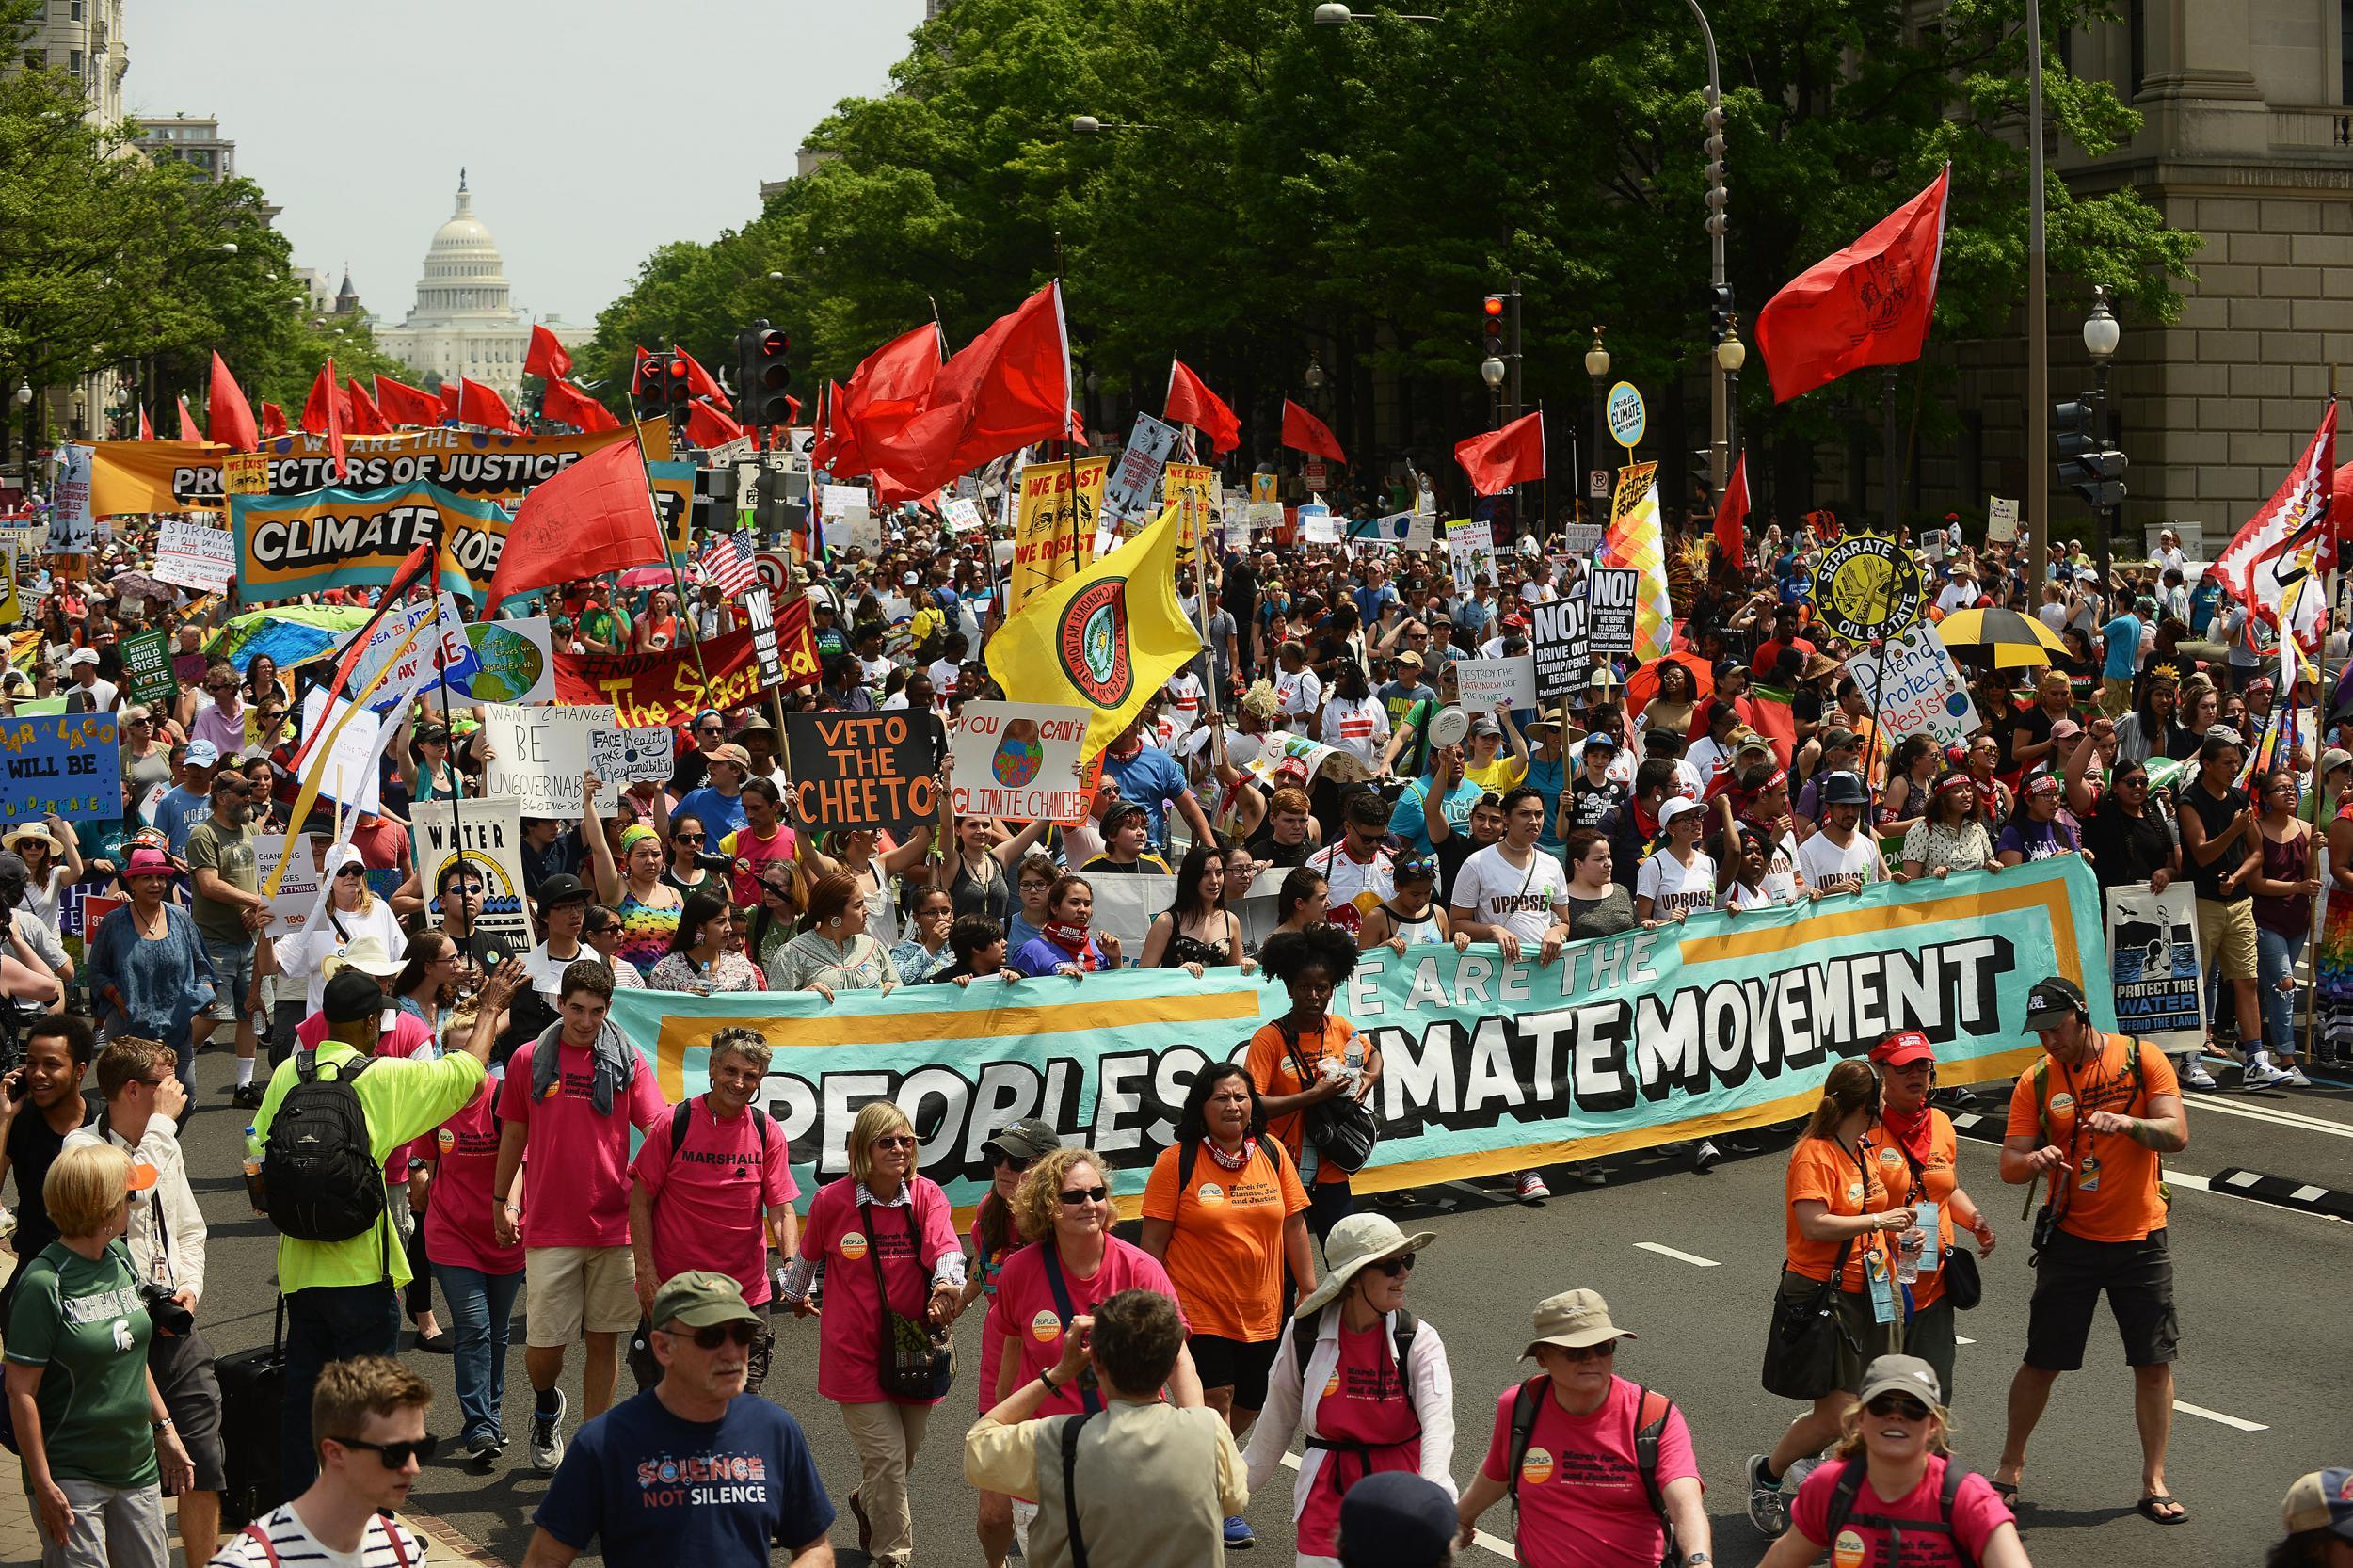 Protesters march in Washington, DC in opposition to Donald Trump's environmental policies